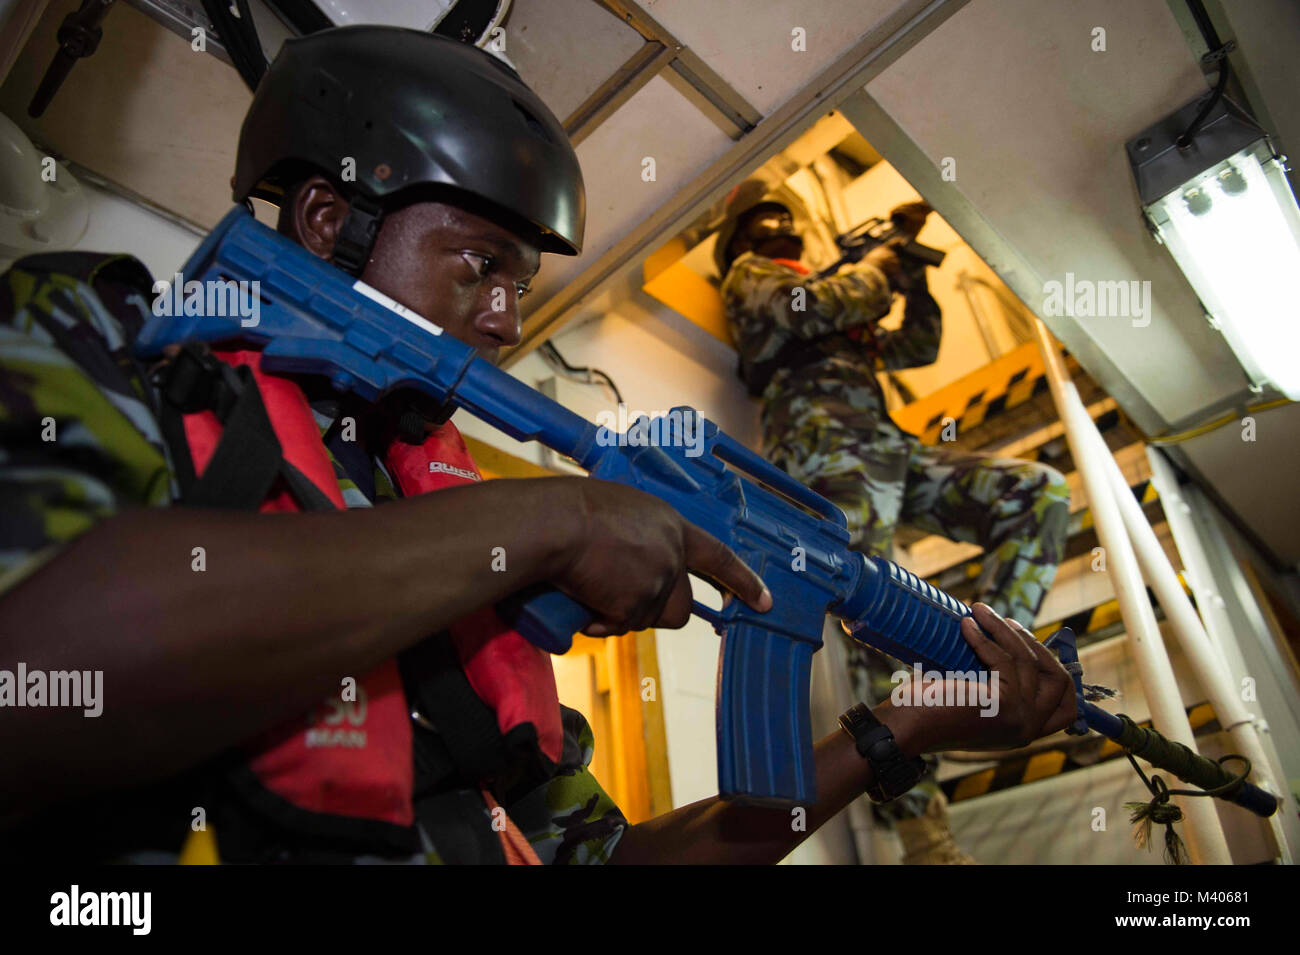 180206-N-KP948-164   DJIBOUTI (Feb. 6, 2018) Members of the Kenya Navy participate in a visit, board, search and seizure (VBSS) drill during exercise Cutlass Express 2018. Cutlass Express is designed to improve cooperation, maritime domain awareness and information sharing practices to increase capabilities between the U.S., East African and Western Indian Ocean nations. (U.S. Navy photo by Mass Communication Specialist 2nd Class Alyssa Weeks) Stock Photo